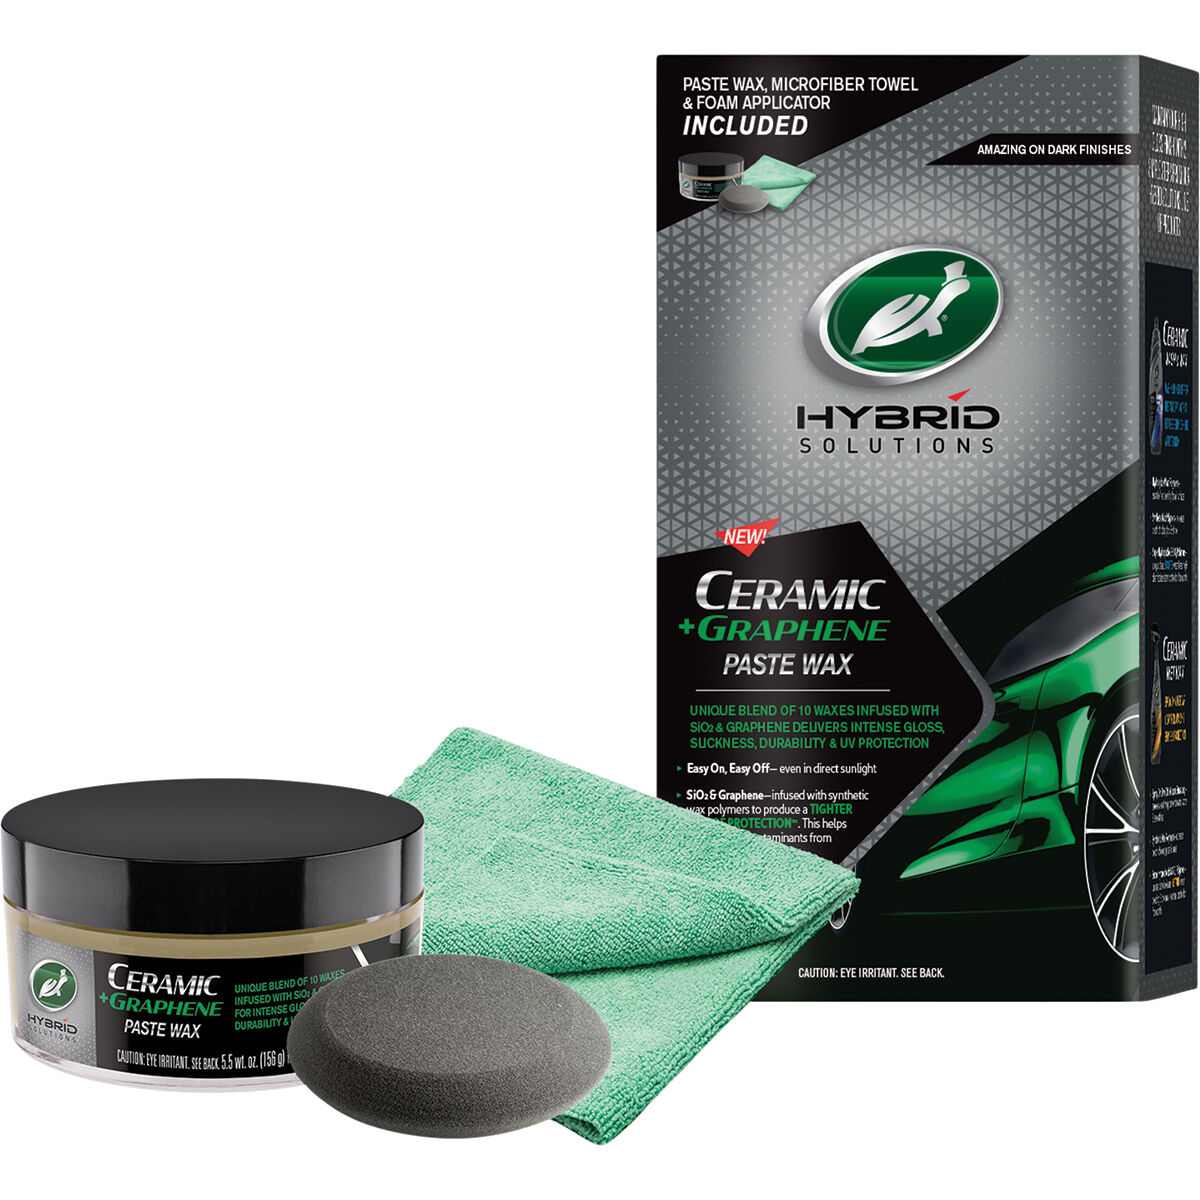 Turtle Wax Hybrid Solutions PRO Line ( With Graphene )